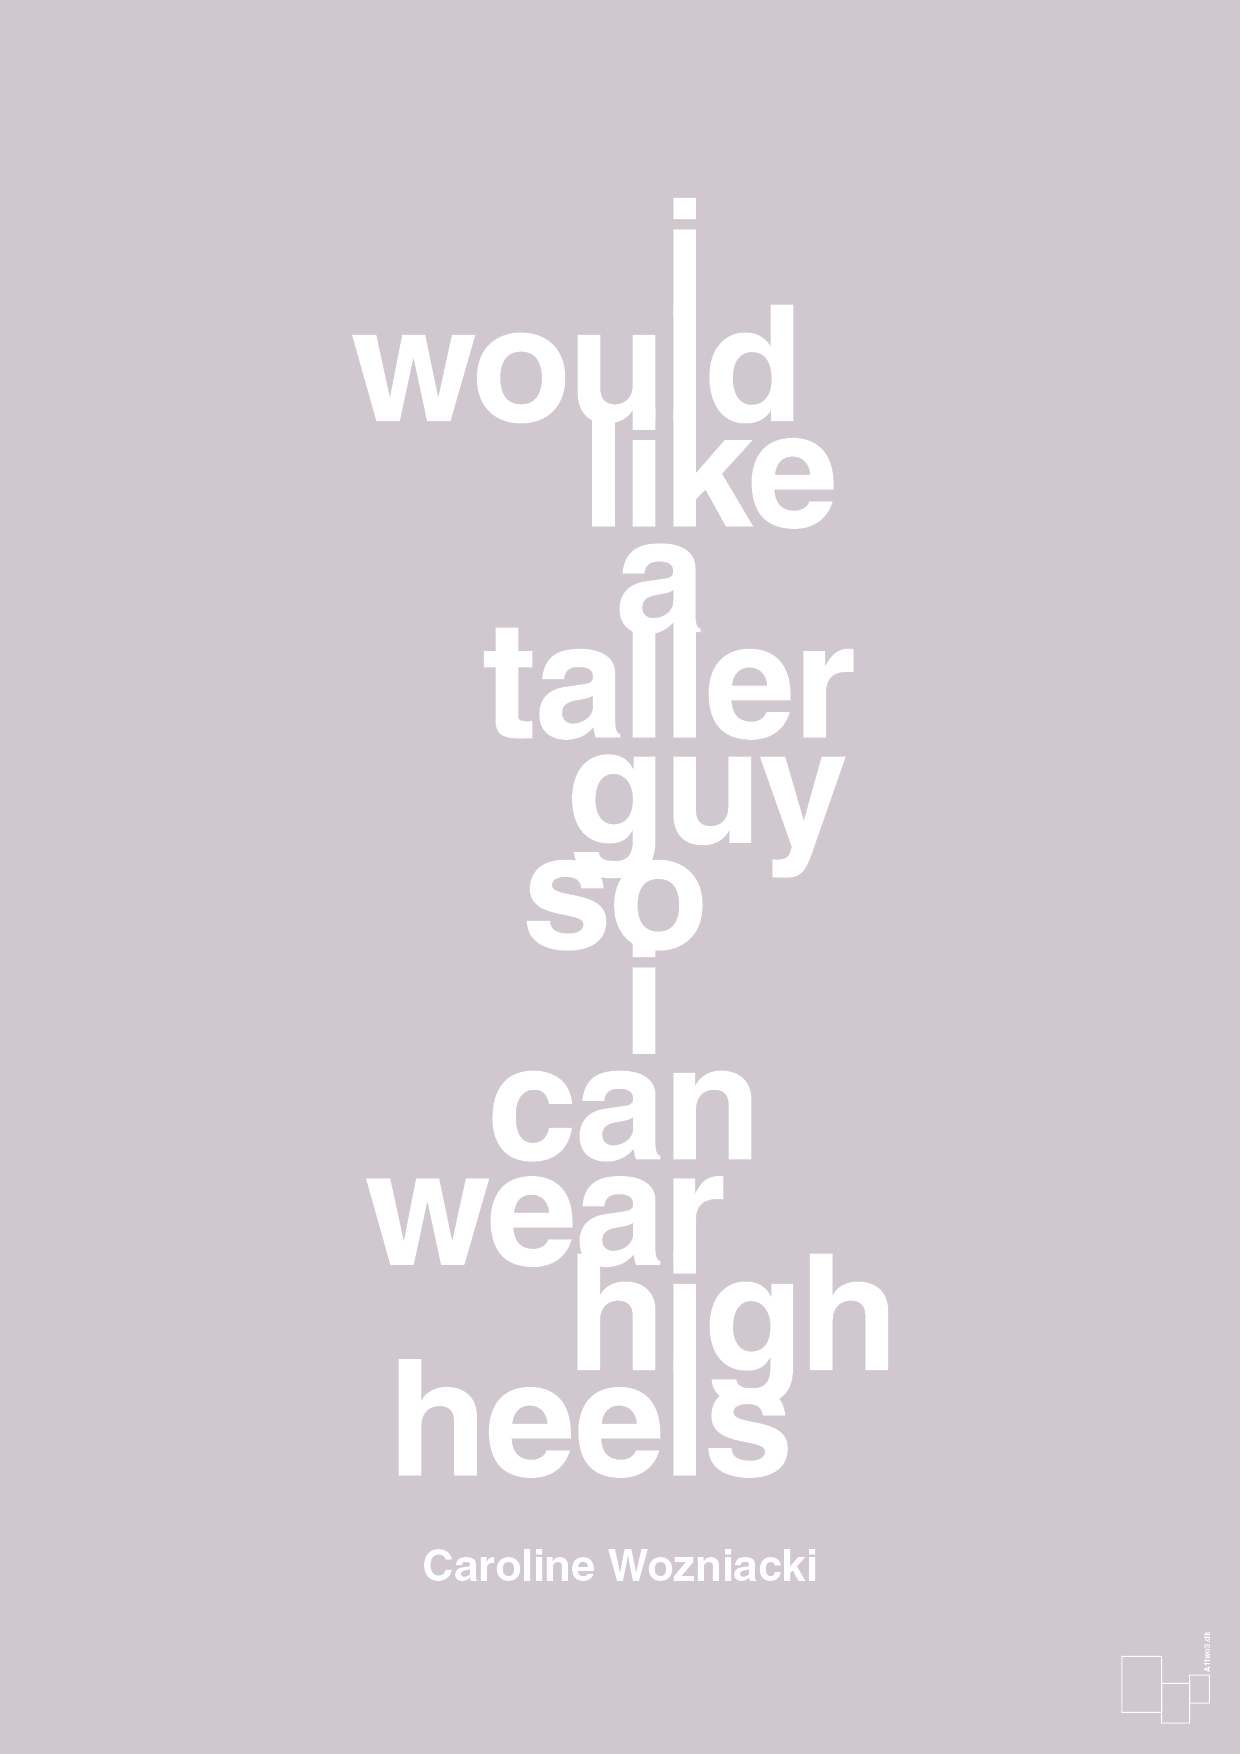 i would like a taller guy so i can wear high heels - Plakat med Citater i Dusty Lilac